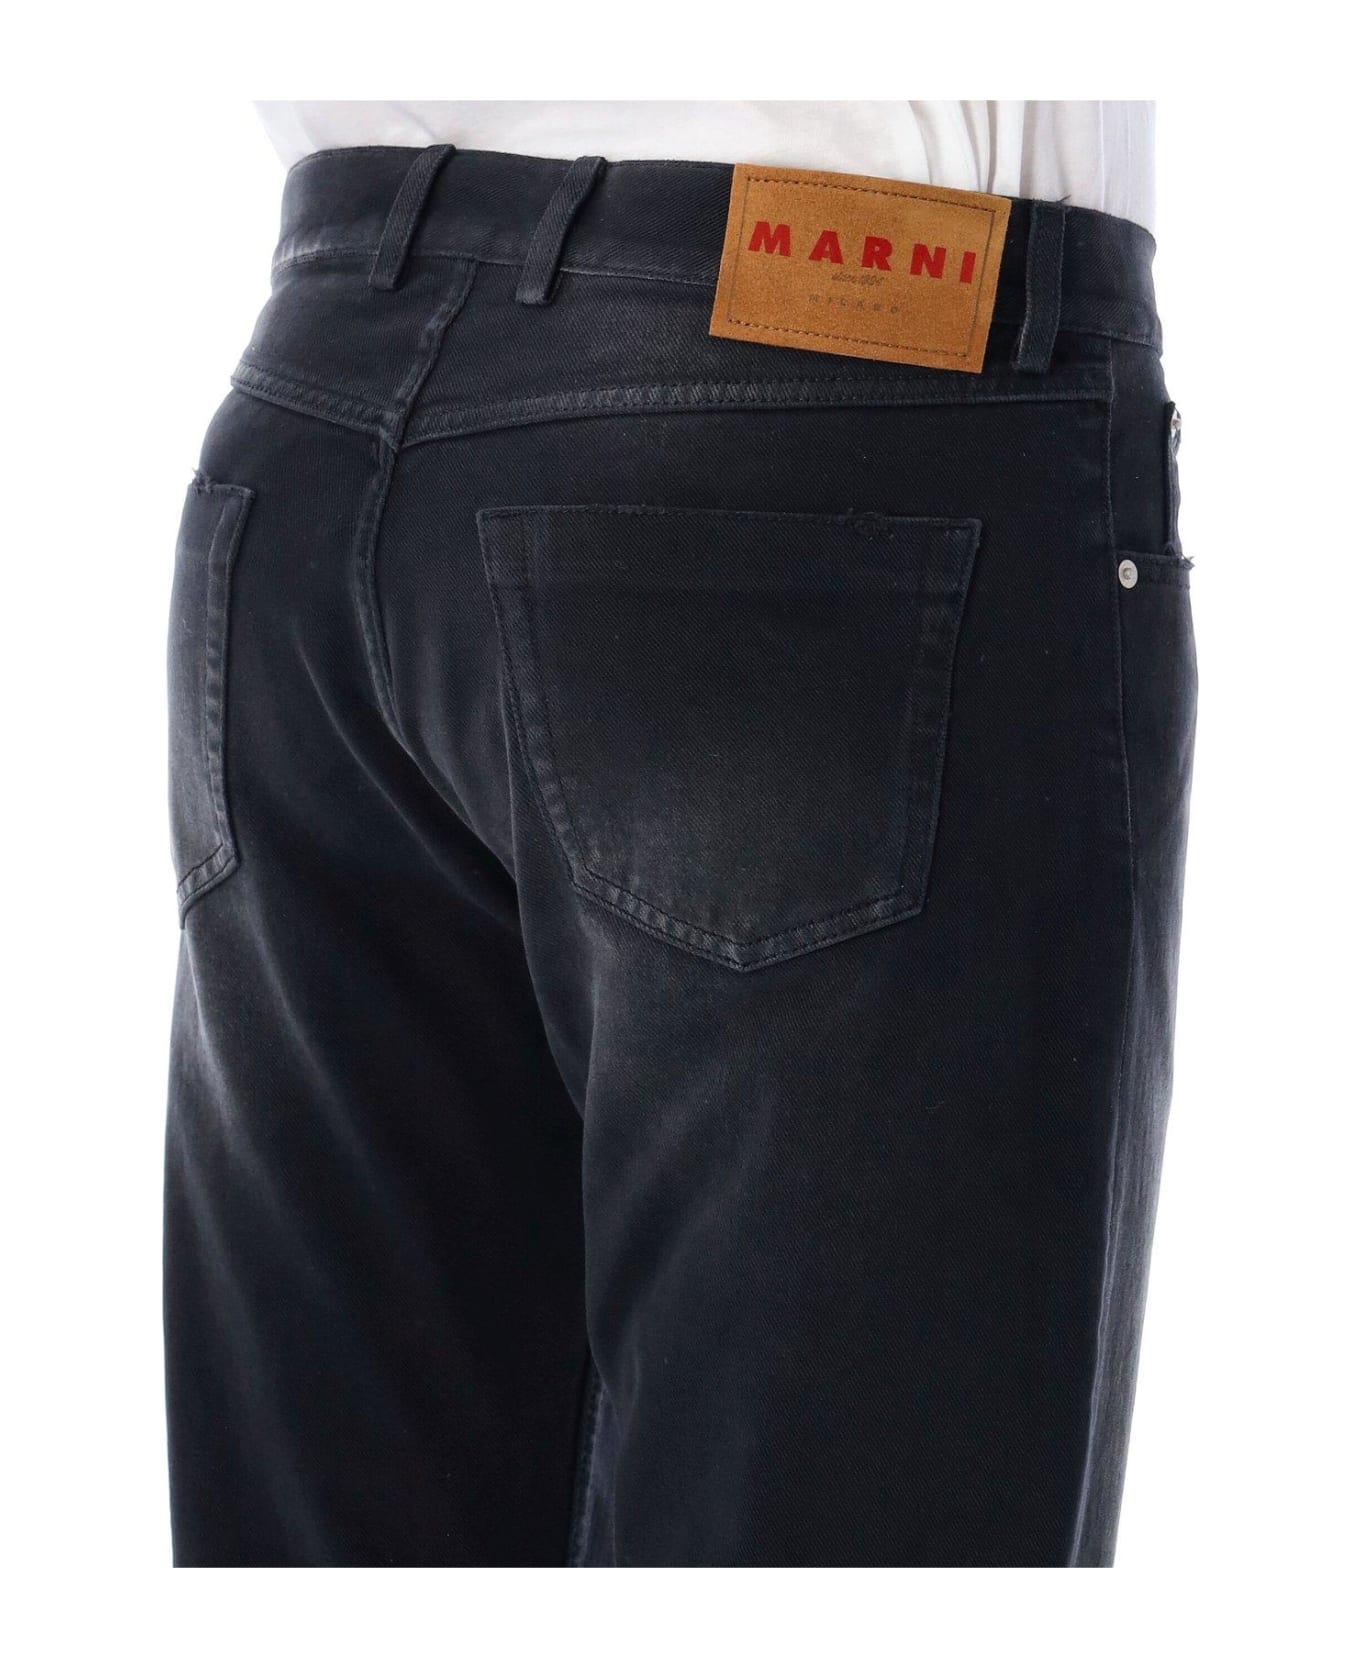 Marni Whiskering Effect Logo Patch Jeans - Grey